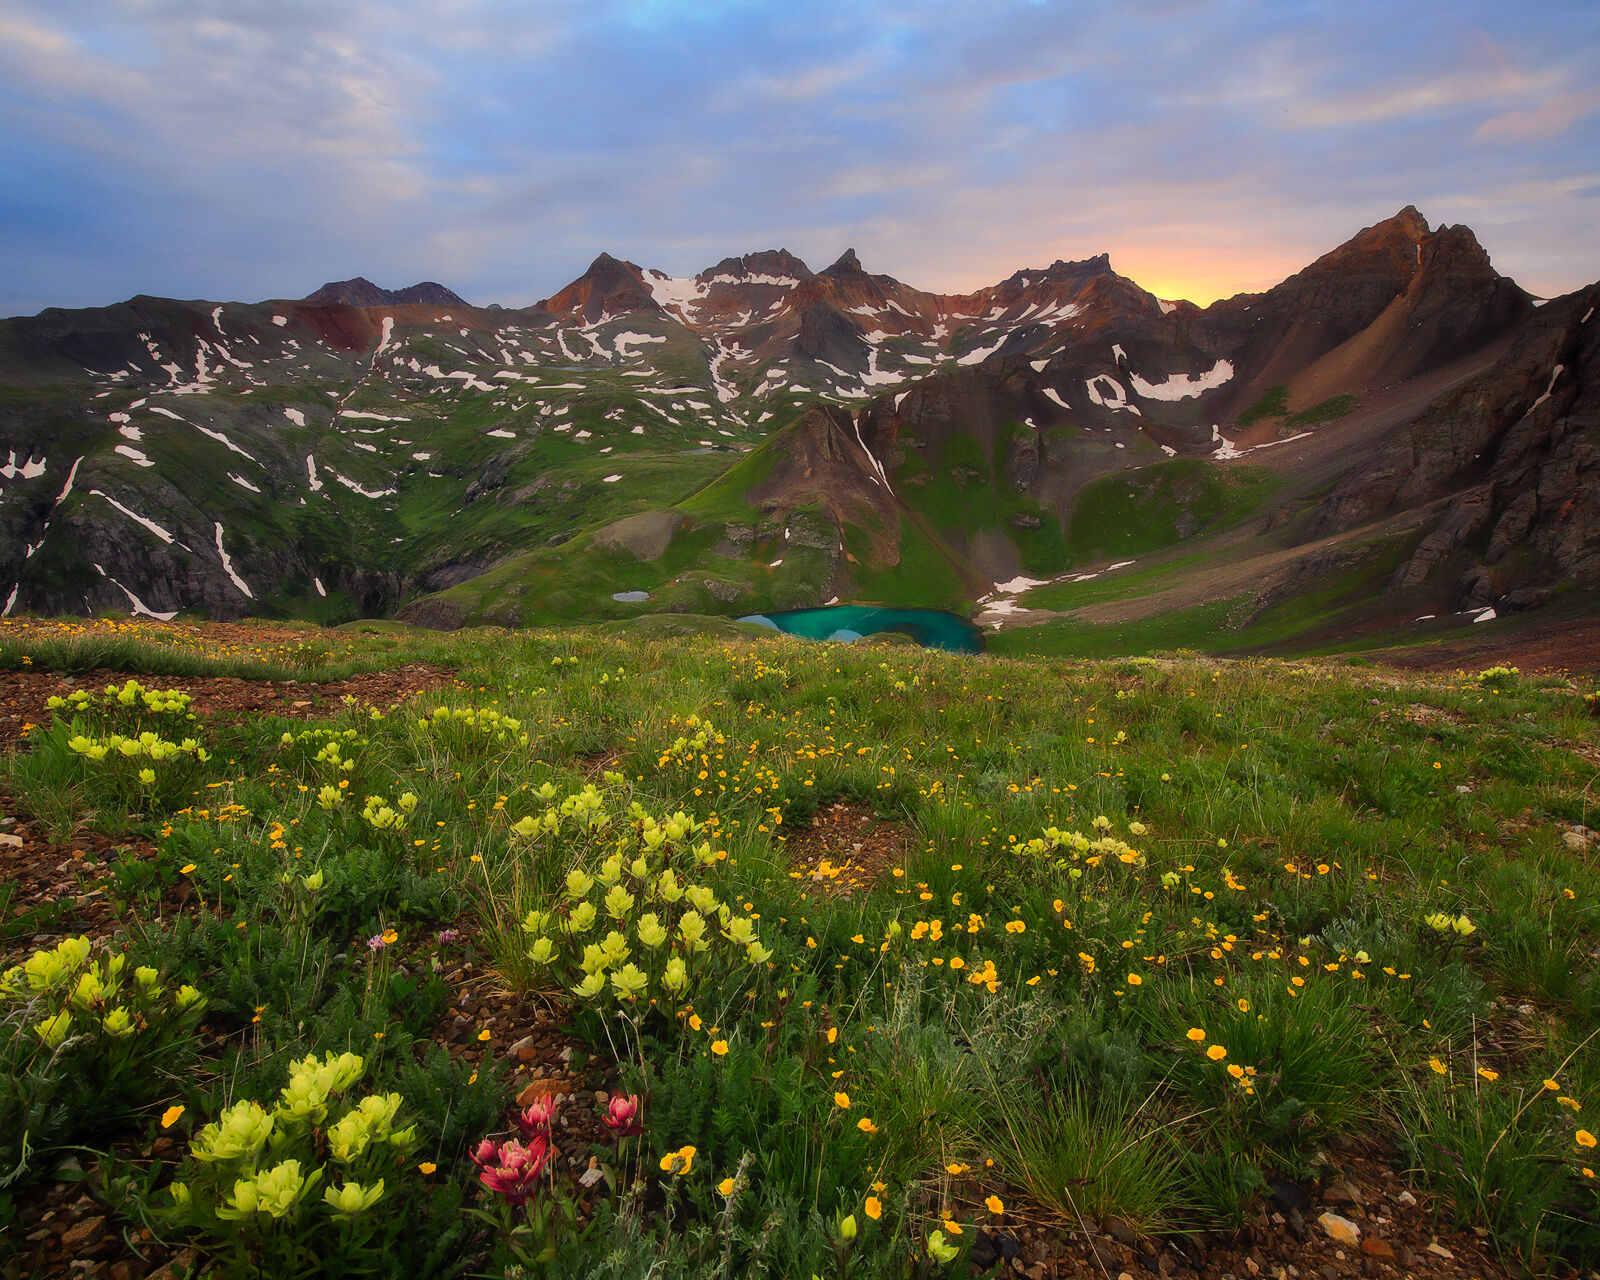 Alpine lake is seen below with a field of springtime wildflowers in front and a range of mountains in on the horizon as the sunsets.